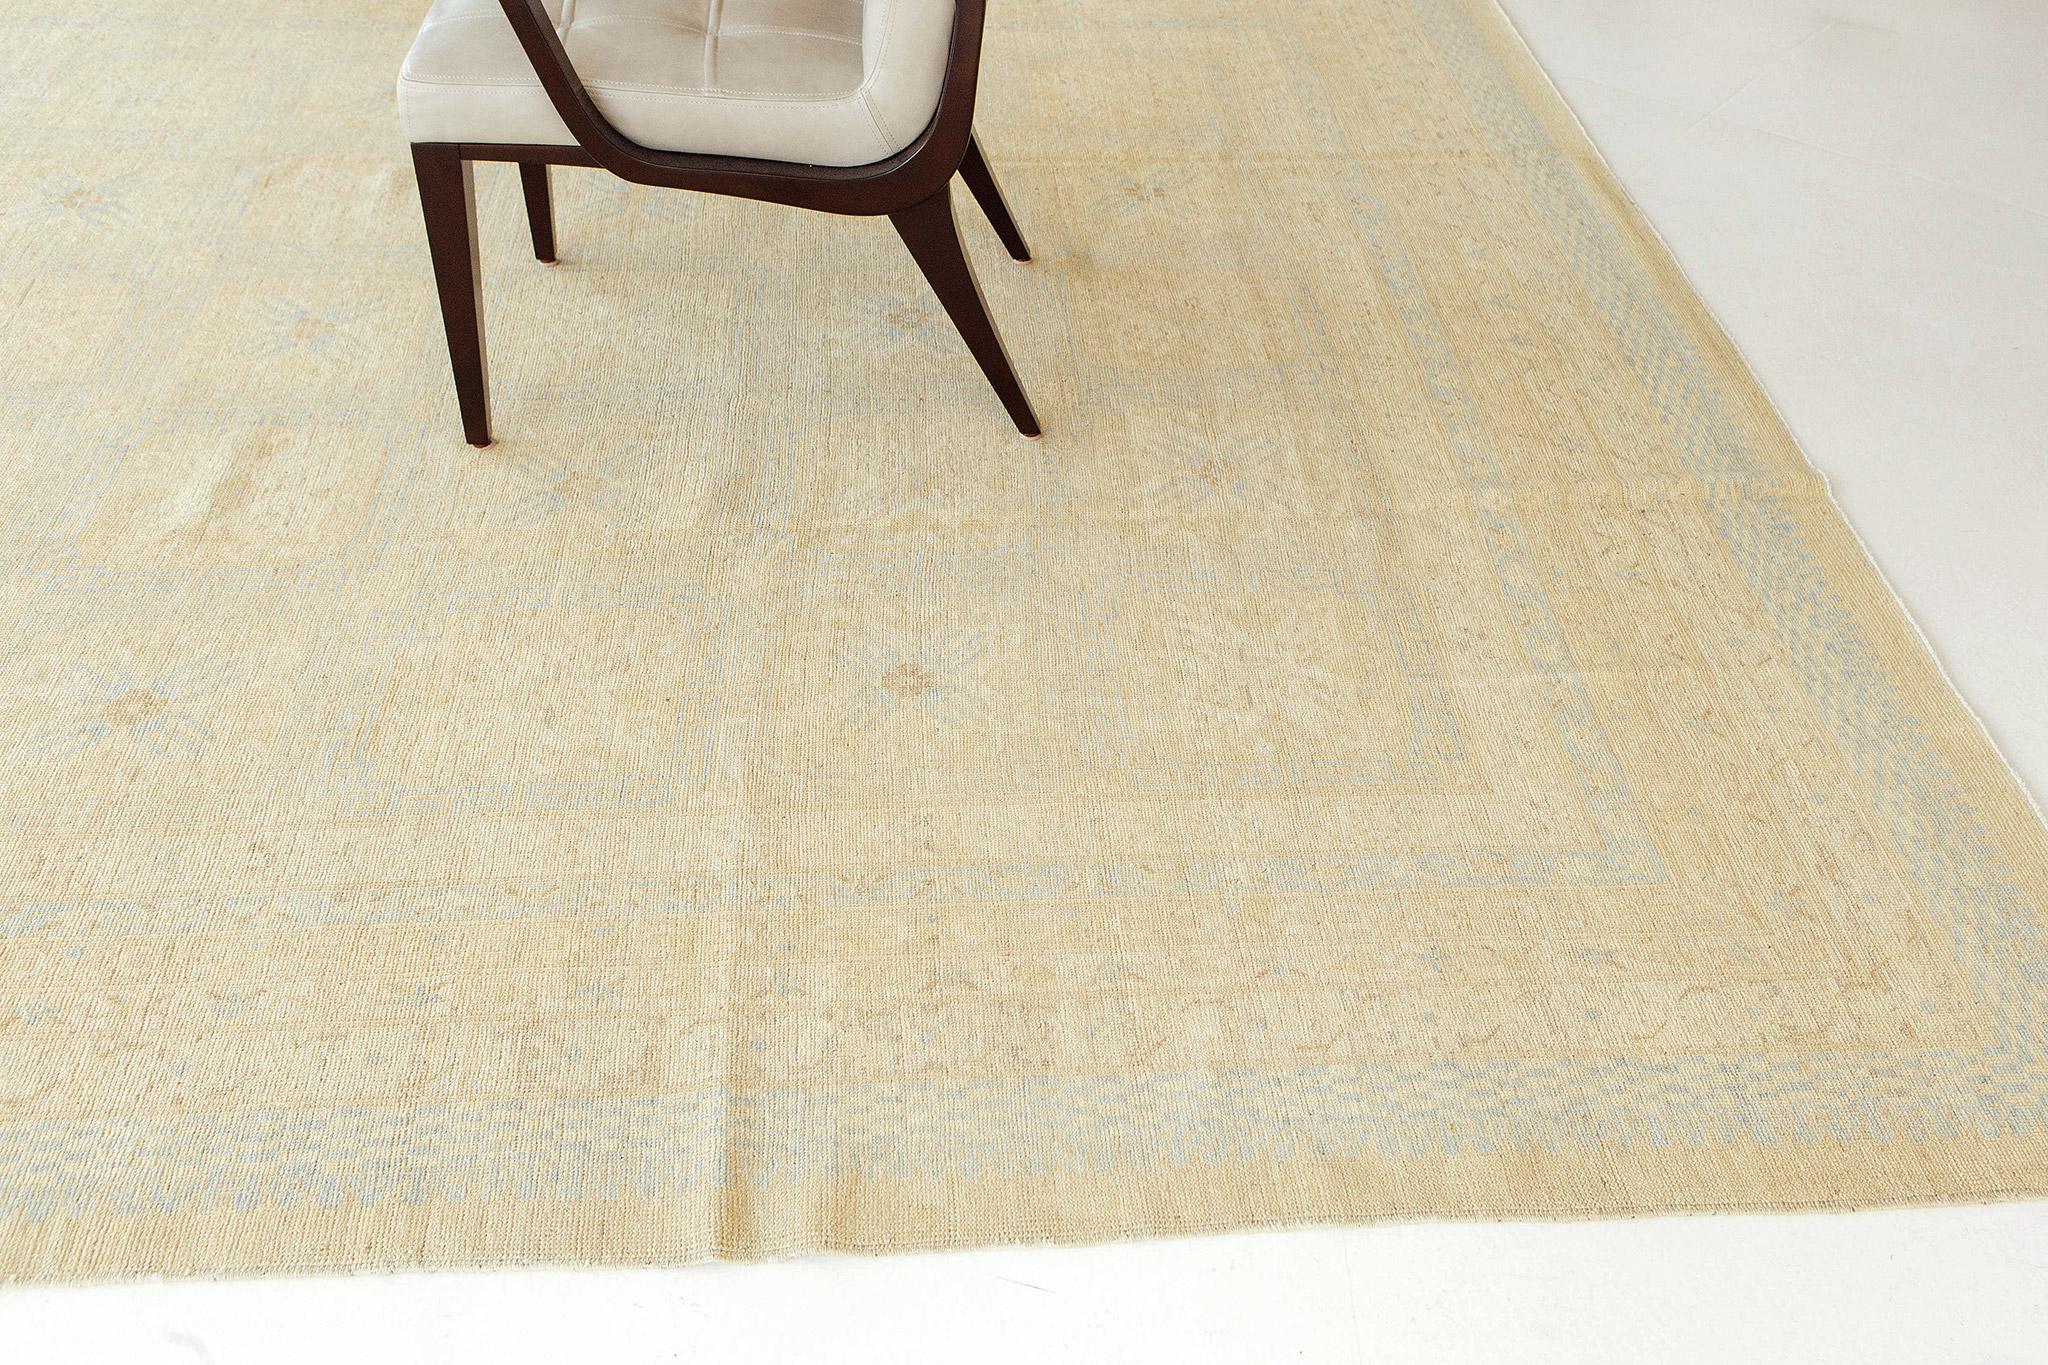 A gorgeous Khotan Panel design recreation. This pieces golden tones and hints of blue create a beautiful and timely piece that will enhance a wide variety of interiors. The repeating square patterns in the rug's field add dimension and elevate the